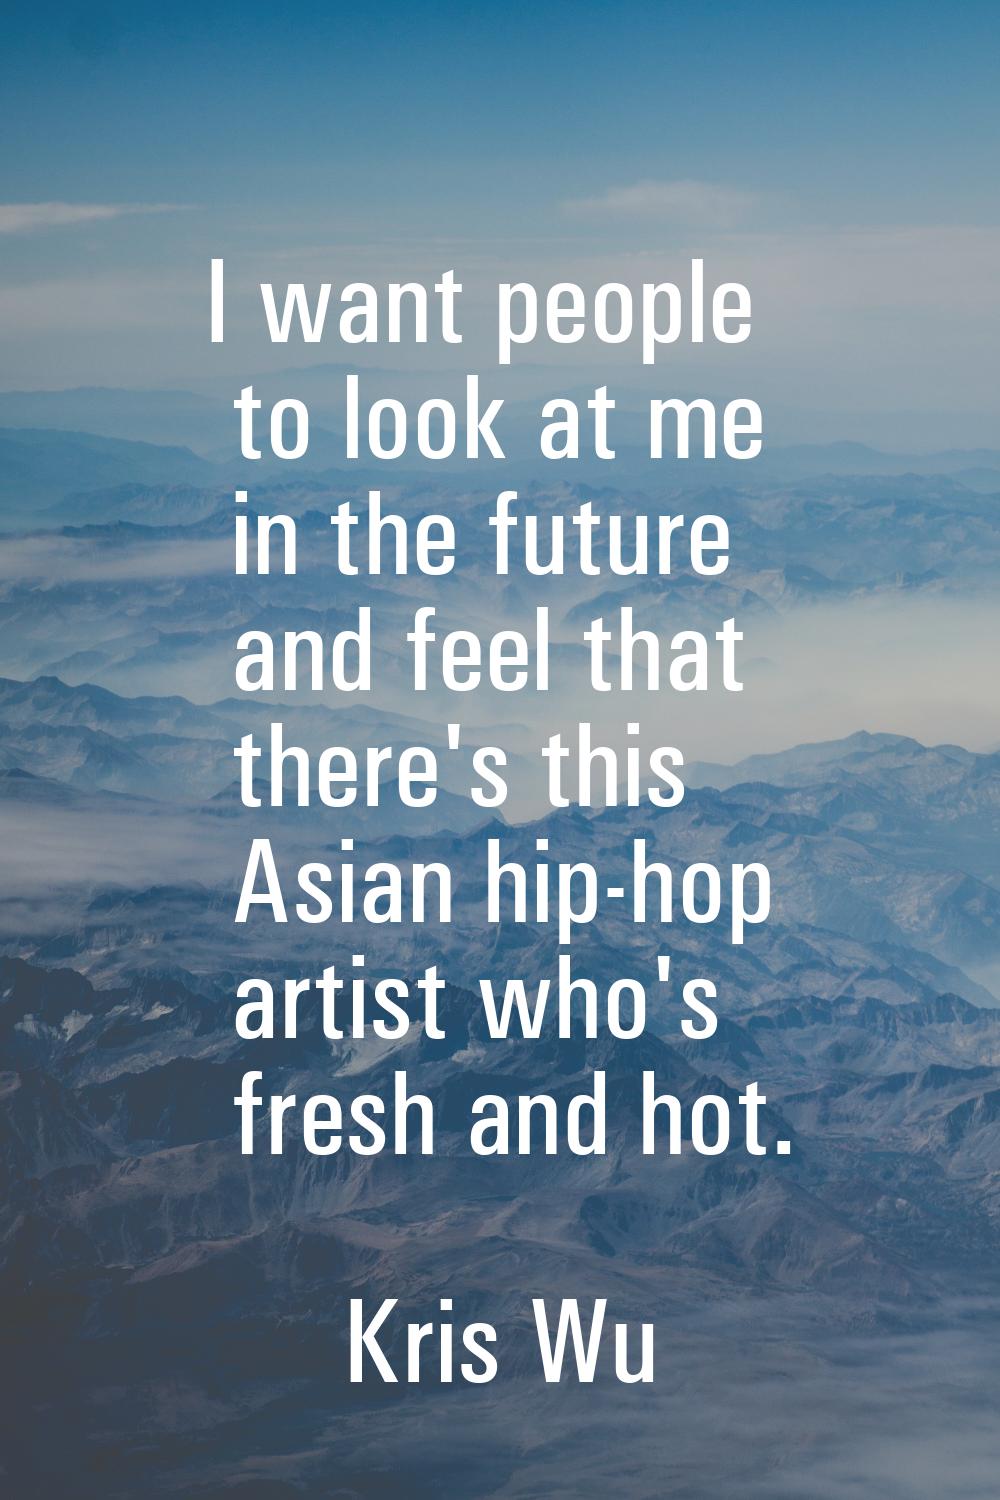 I want people to look at me in the future and feel that there's this Asian hip-hop artist who's fre